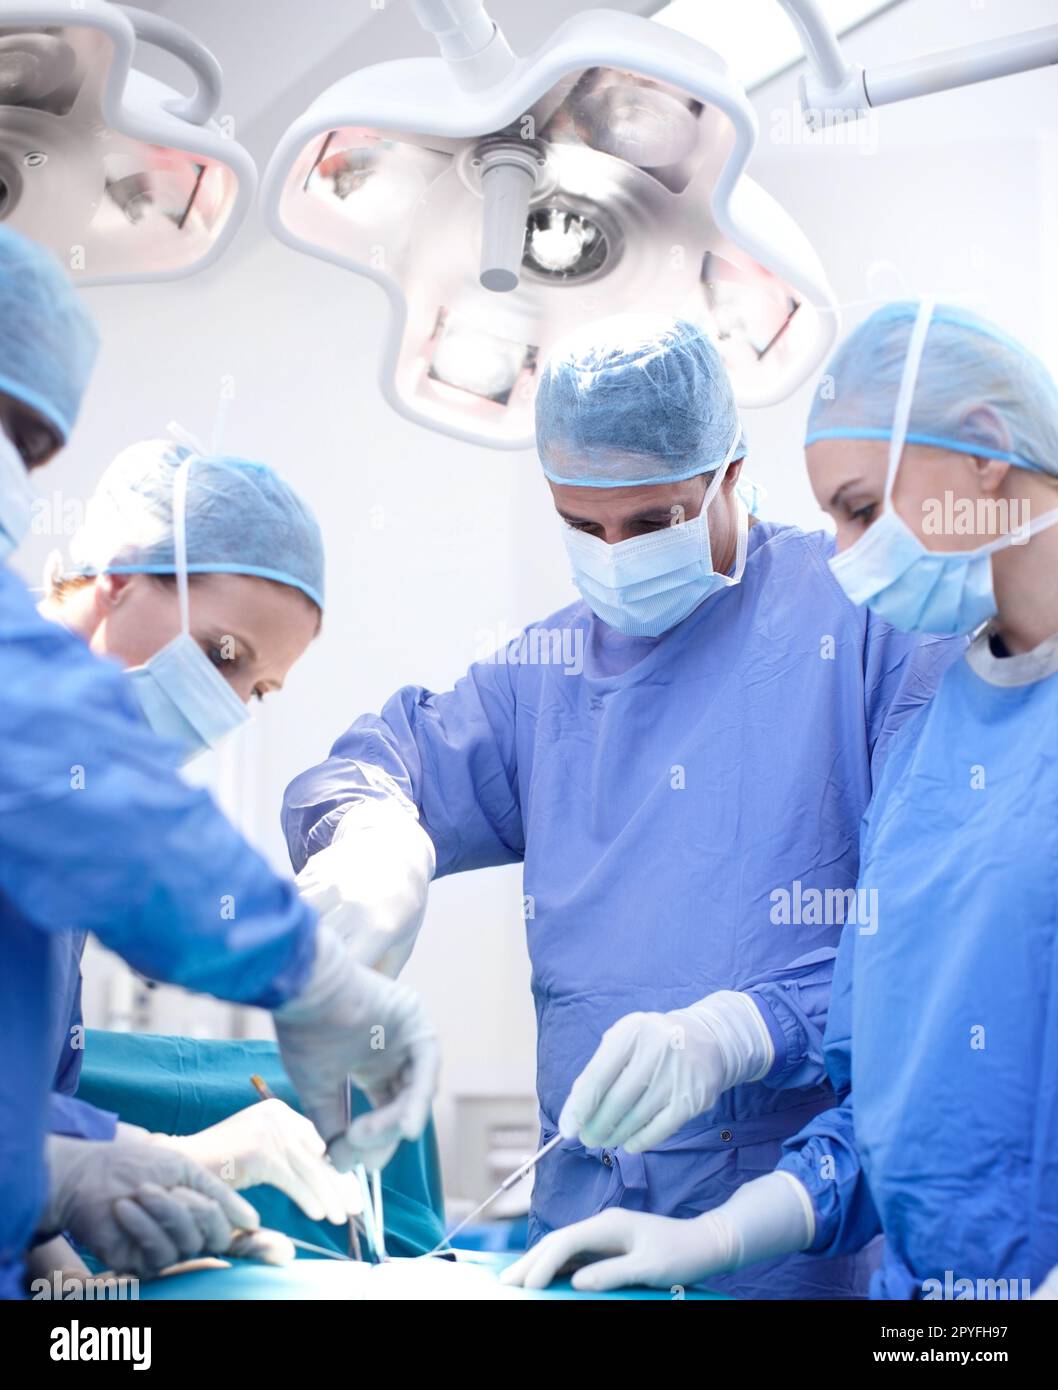 Doctors at work. Diverse group of surgeons working together wearing scrubs in an operating room. Stock Photo